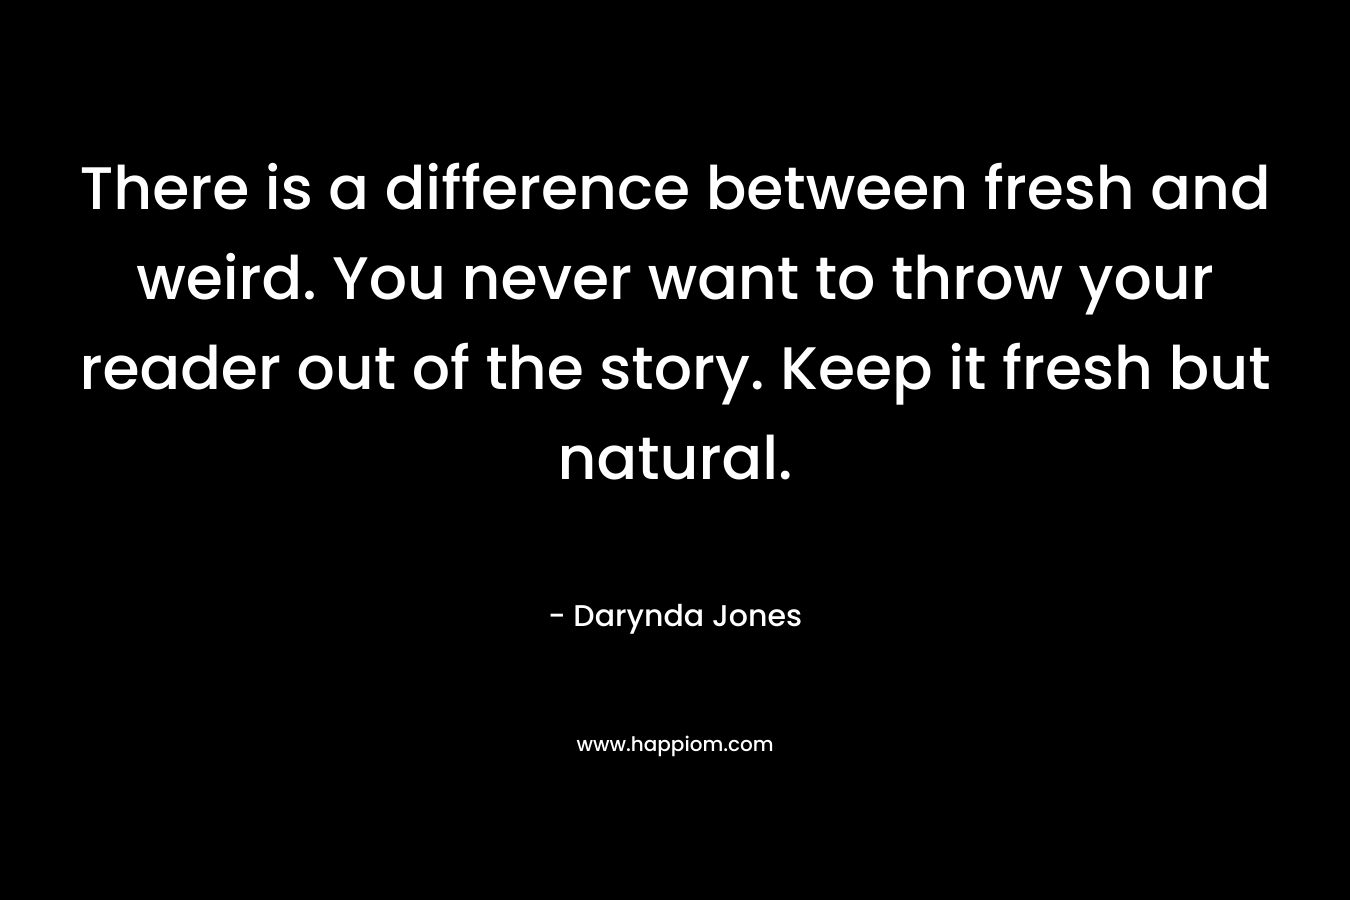 There is a difference between fresh and weird. You never want to throw your reader out of the story. Keep it fresh but natural. – Darynda Jones